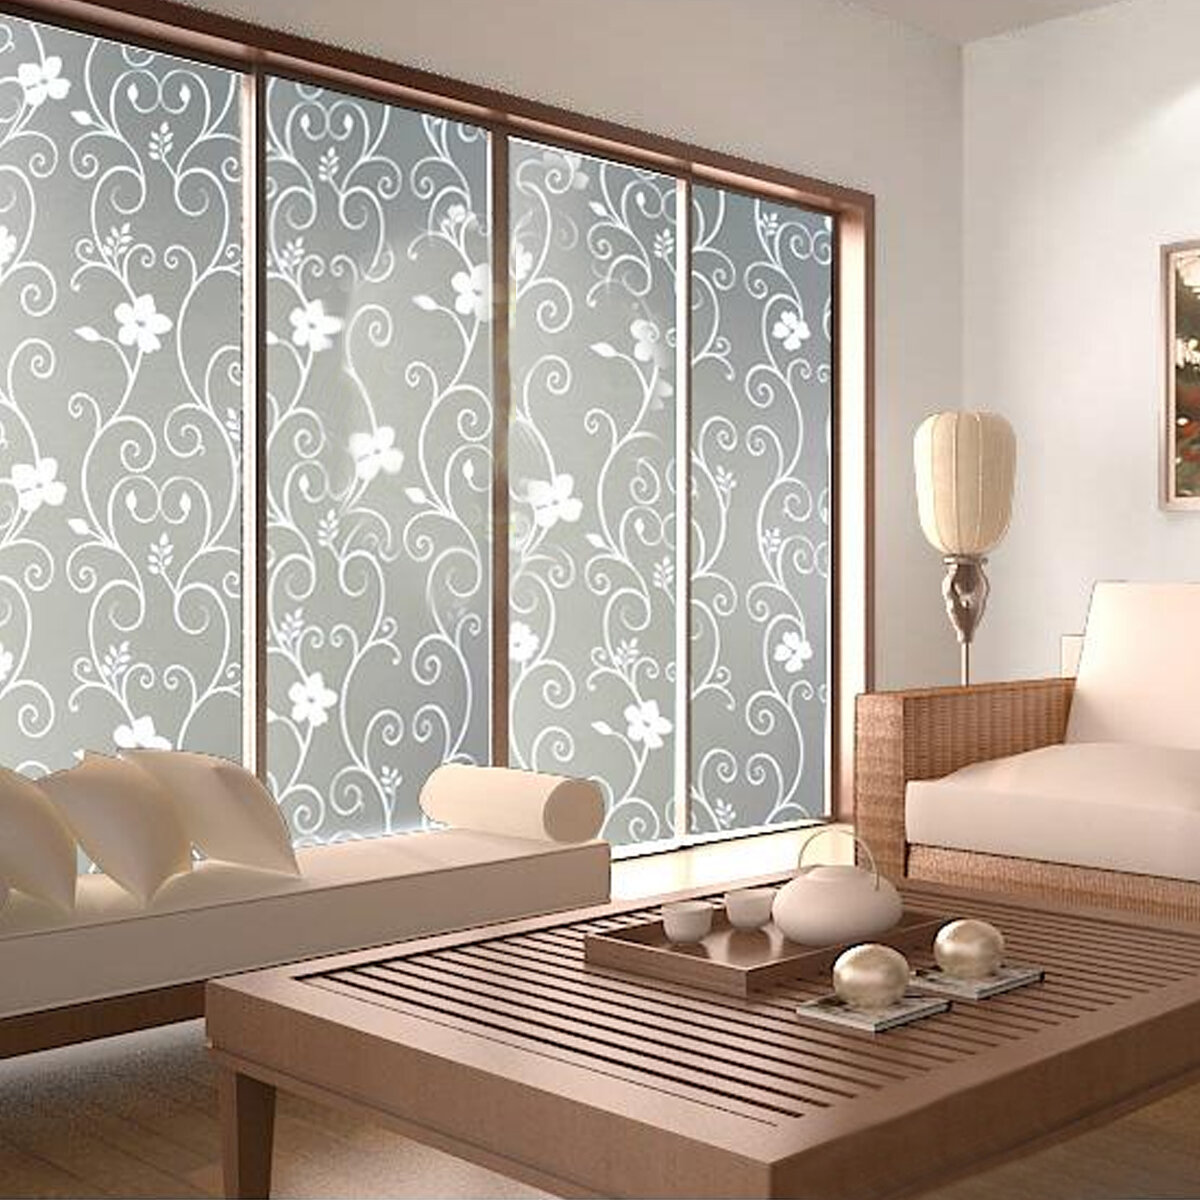 45*200cm Waterproof Frosted Bathroom Window Glass Film Stickers Decorations